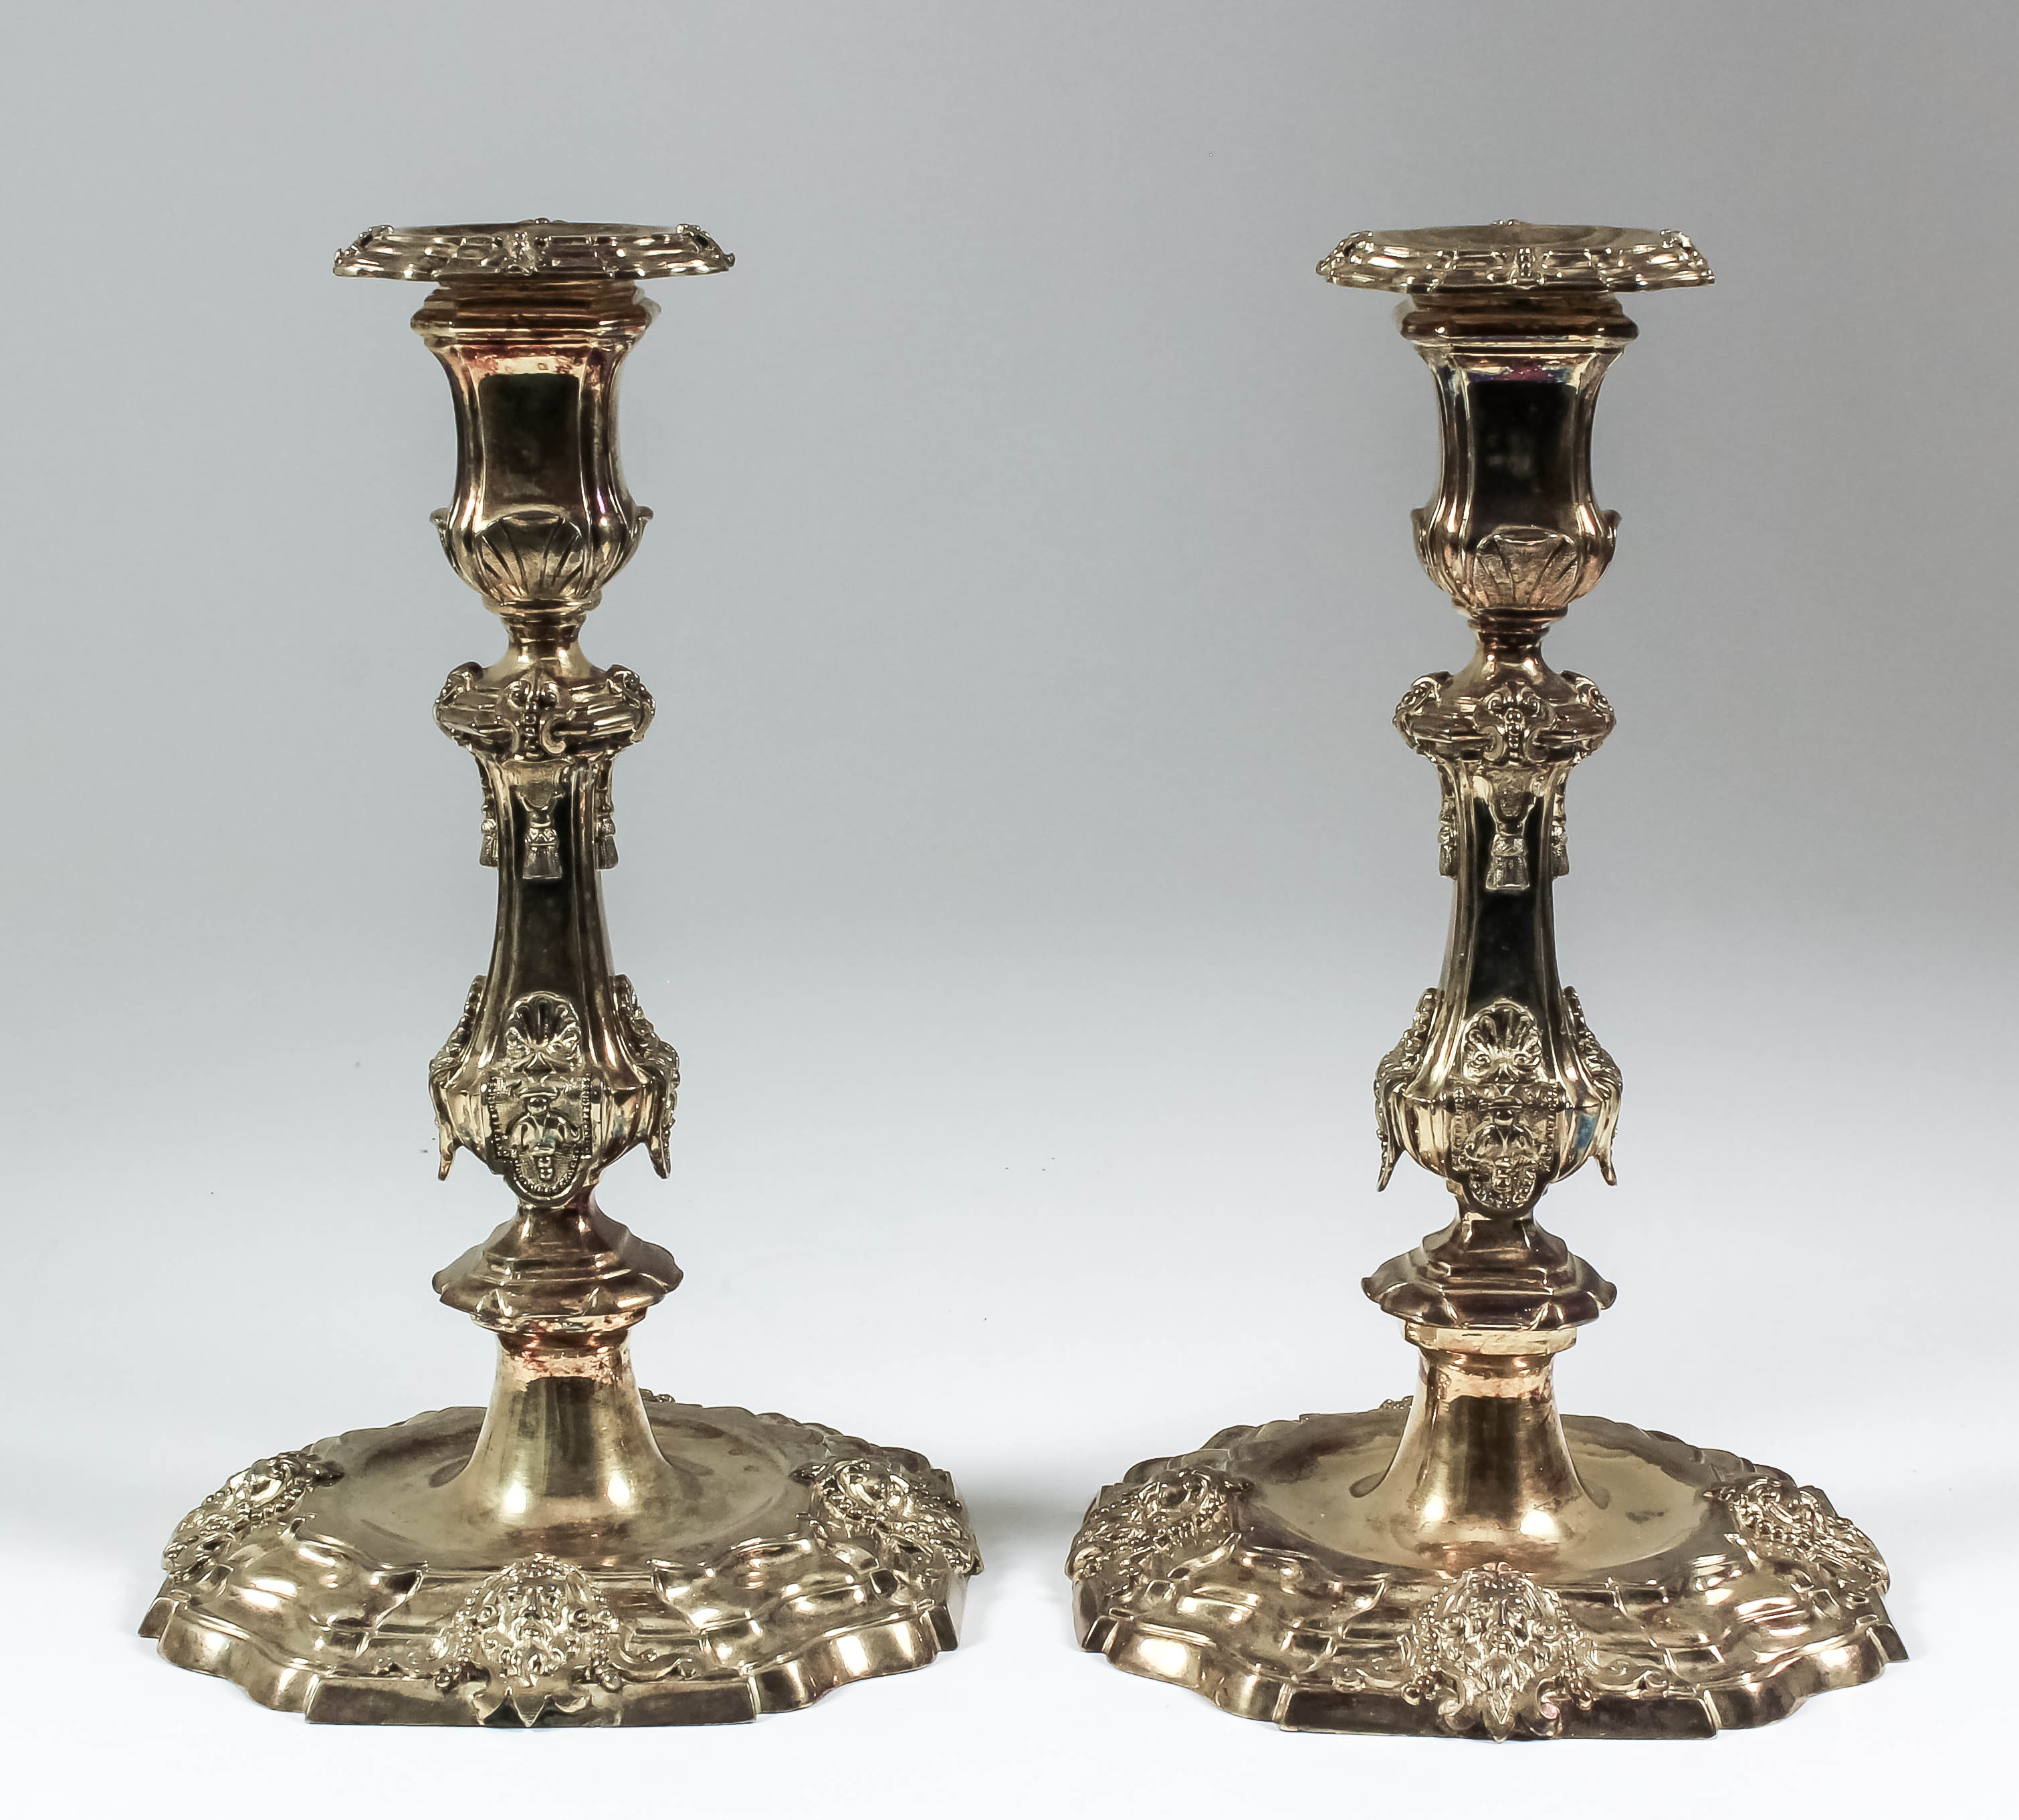 Two silver gilt pillar candlesticks of "early 18th Century" French design, with square moulded